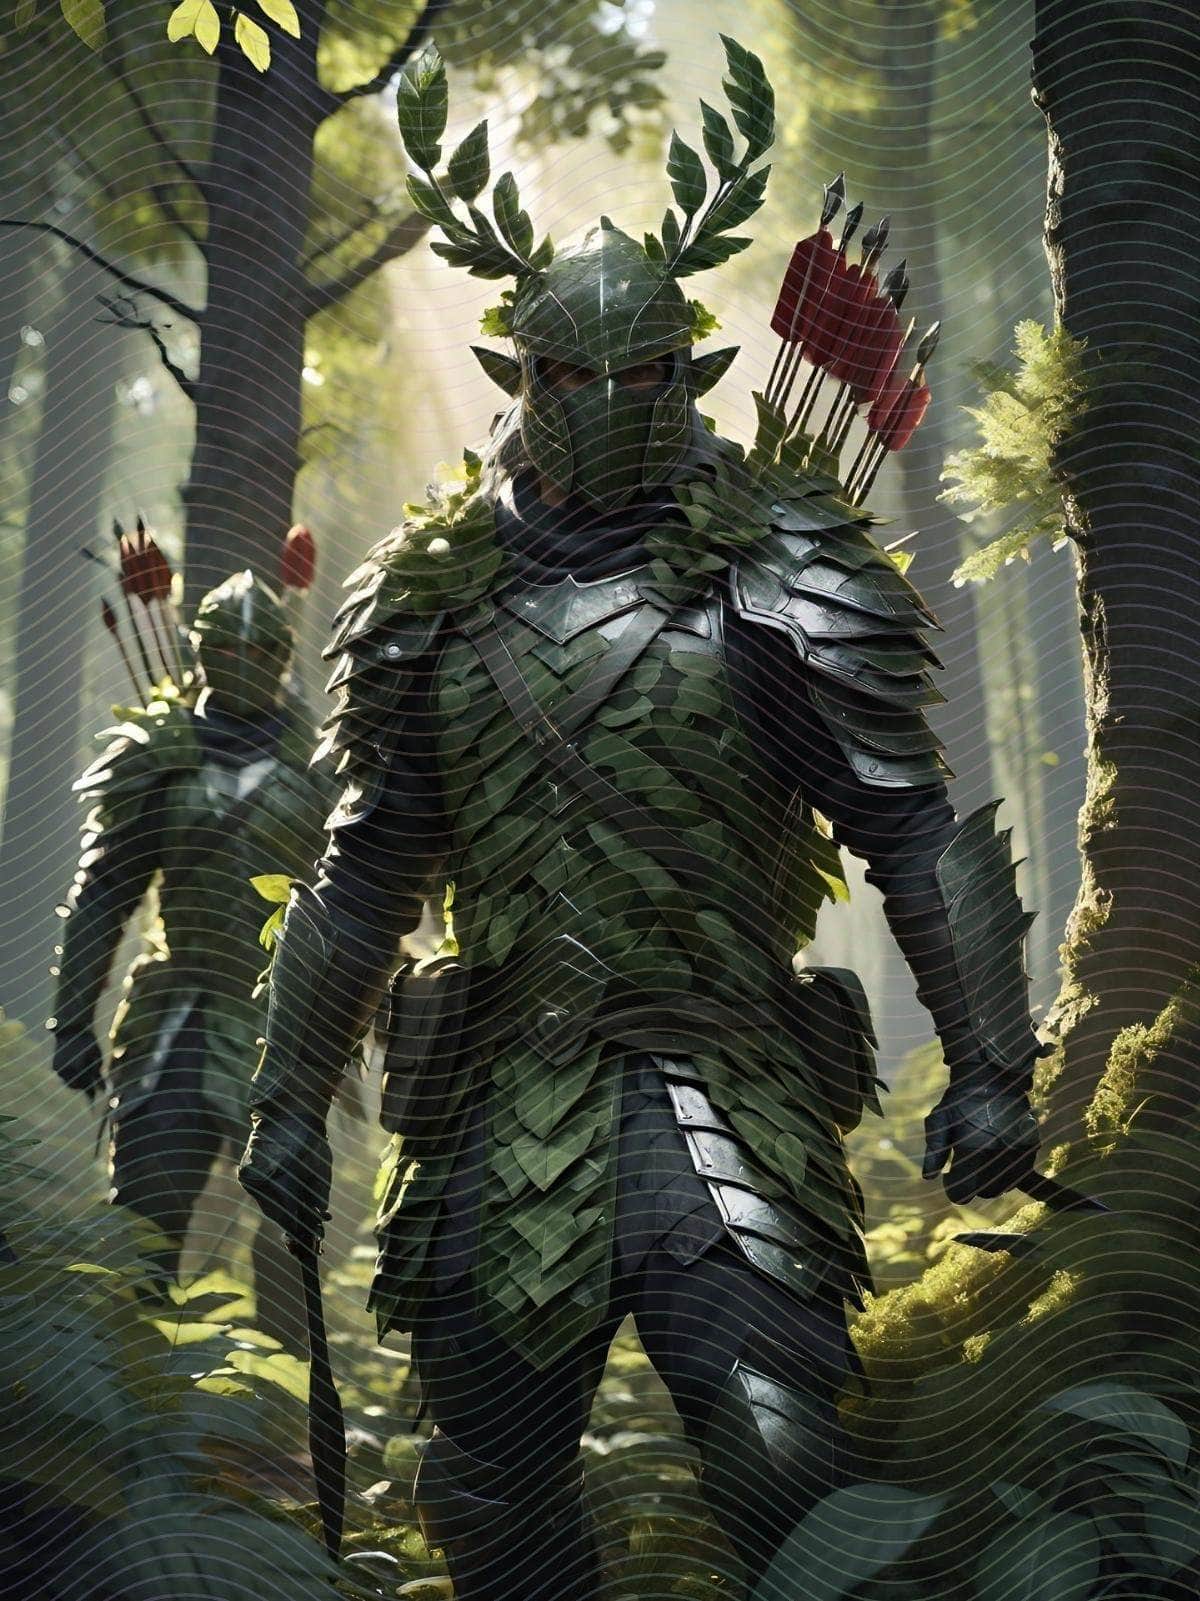 Forest Warriors Dressed in Leafy Camouflage